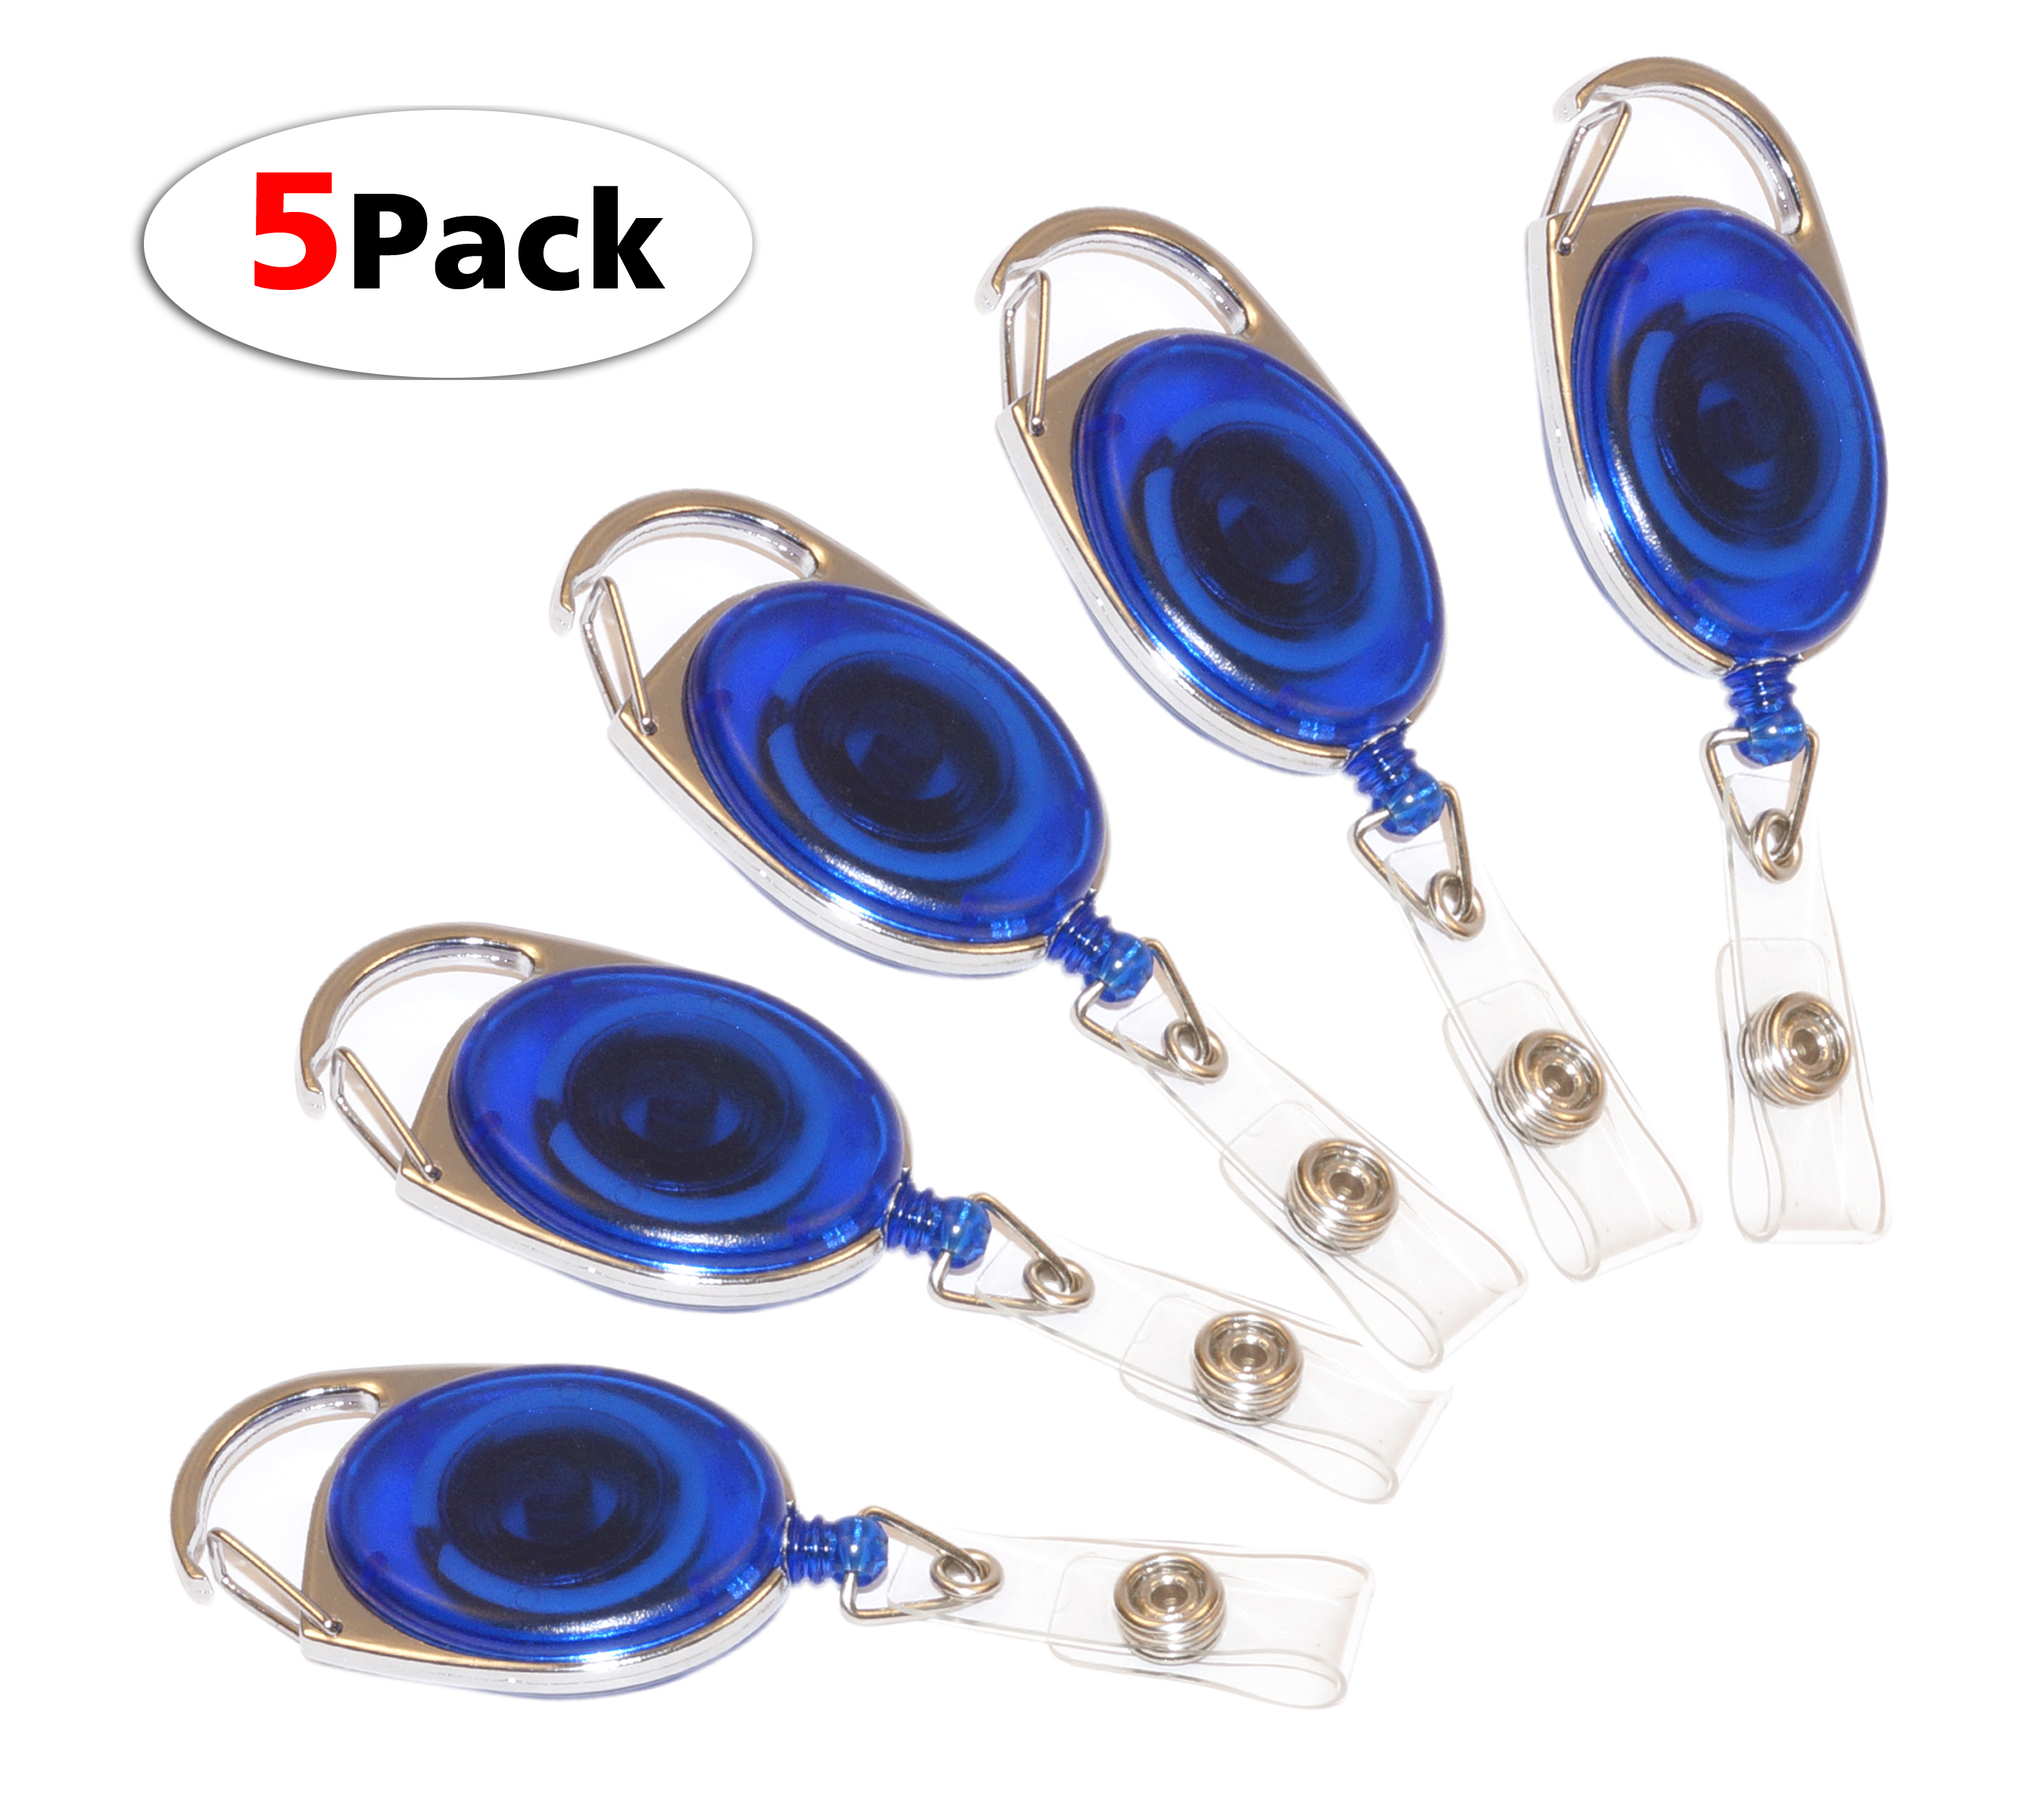 FIVE-PACK OF OVAL CLIPS - Multicolored